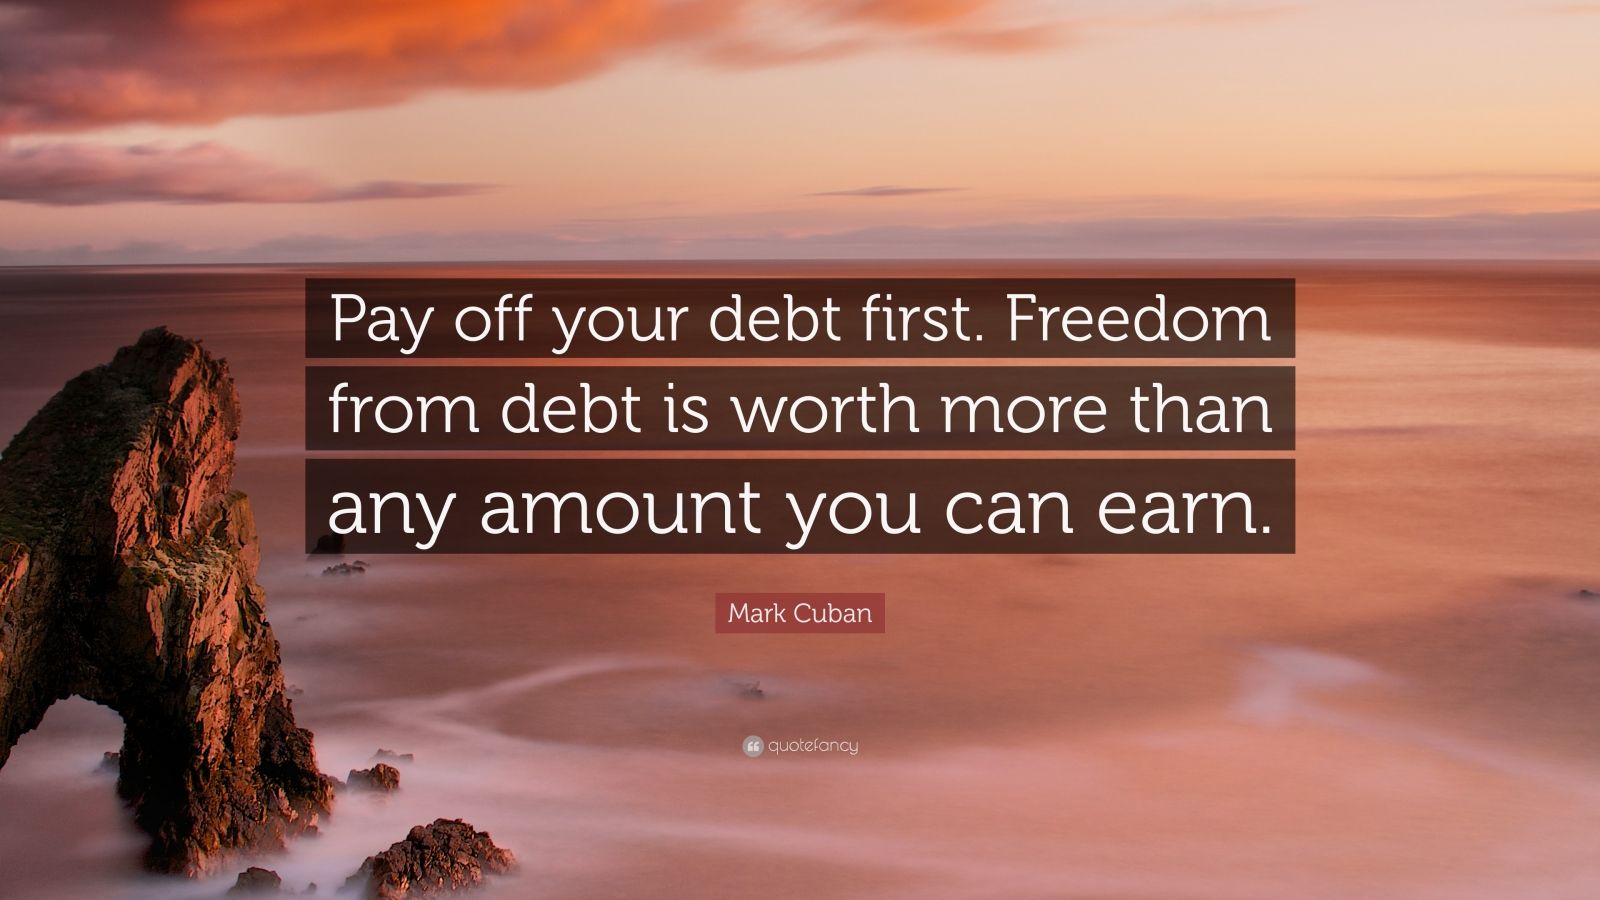 Mark Cuban Quote “Pay off your debt first. Freedom from debt is worth